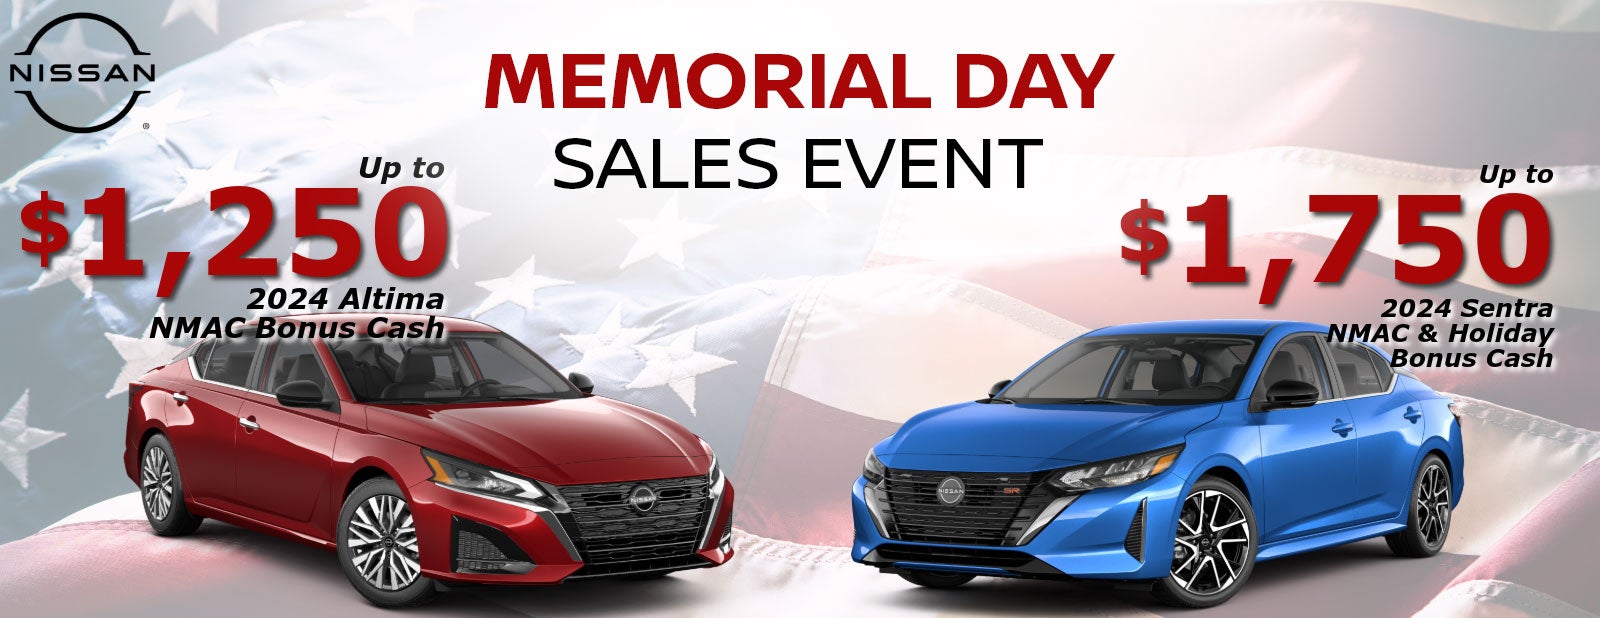 Nissan Memorial Day Event